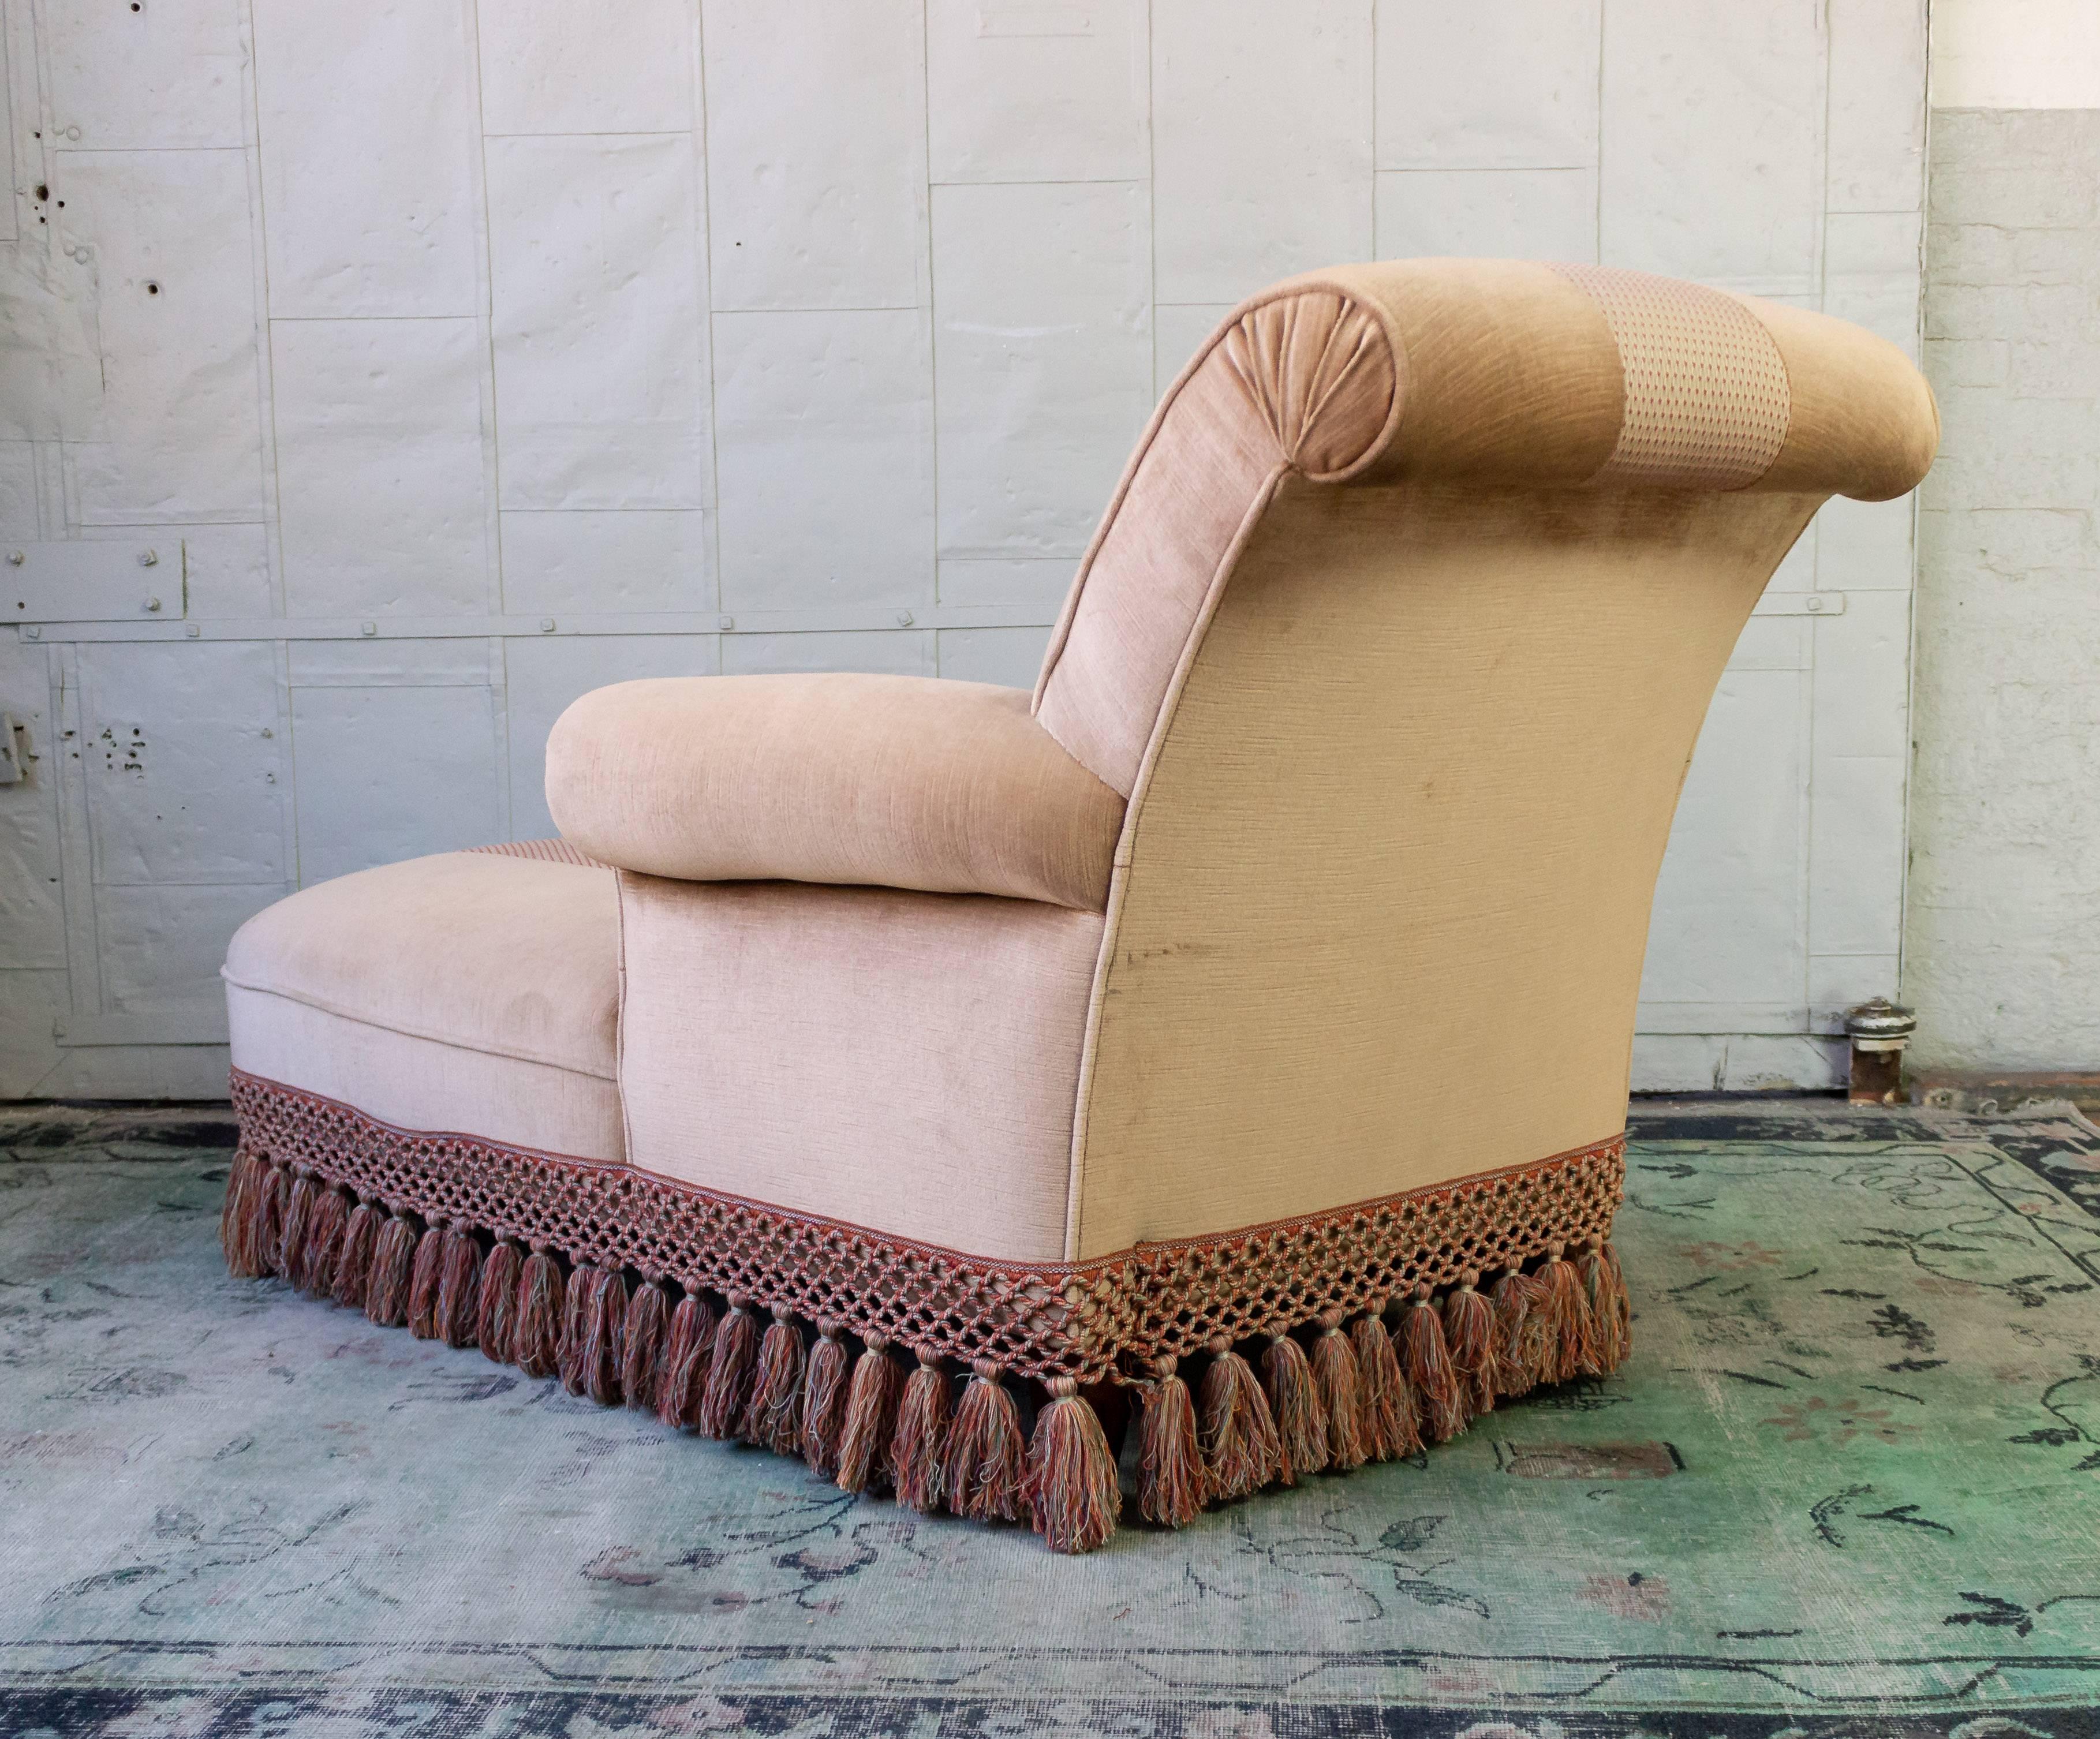 Chaise Longue With Contrasting Fabric and Trim 3